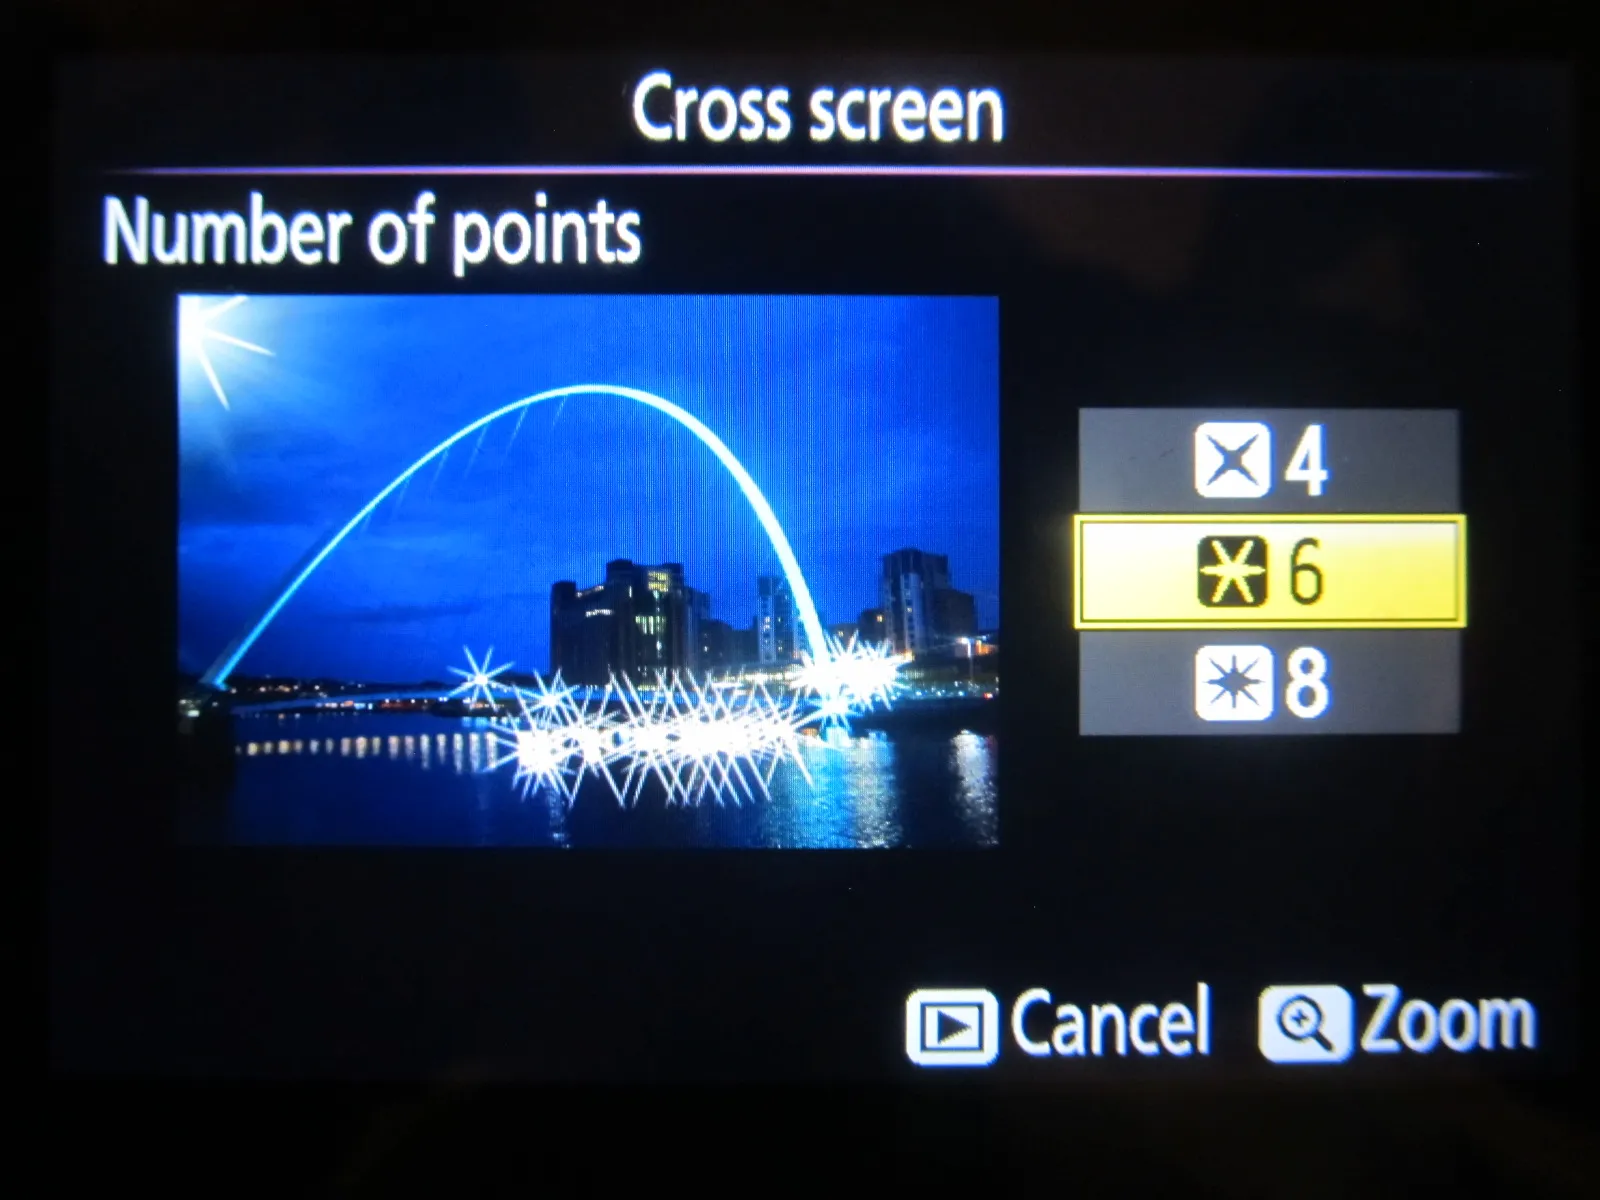 Nikon D5300 cross screen and number of points 2